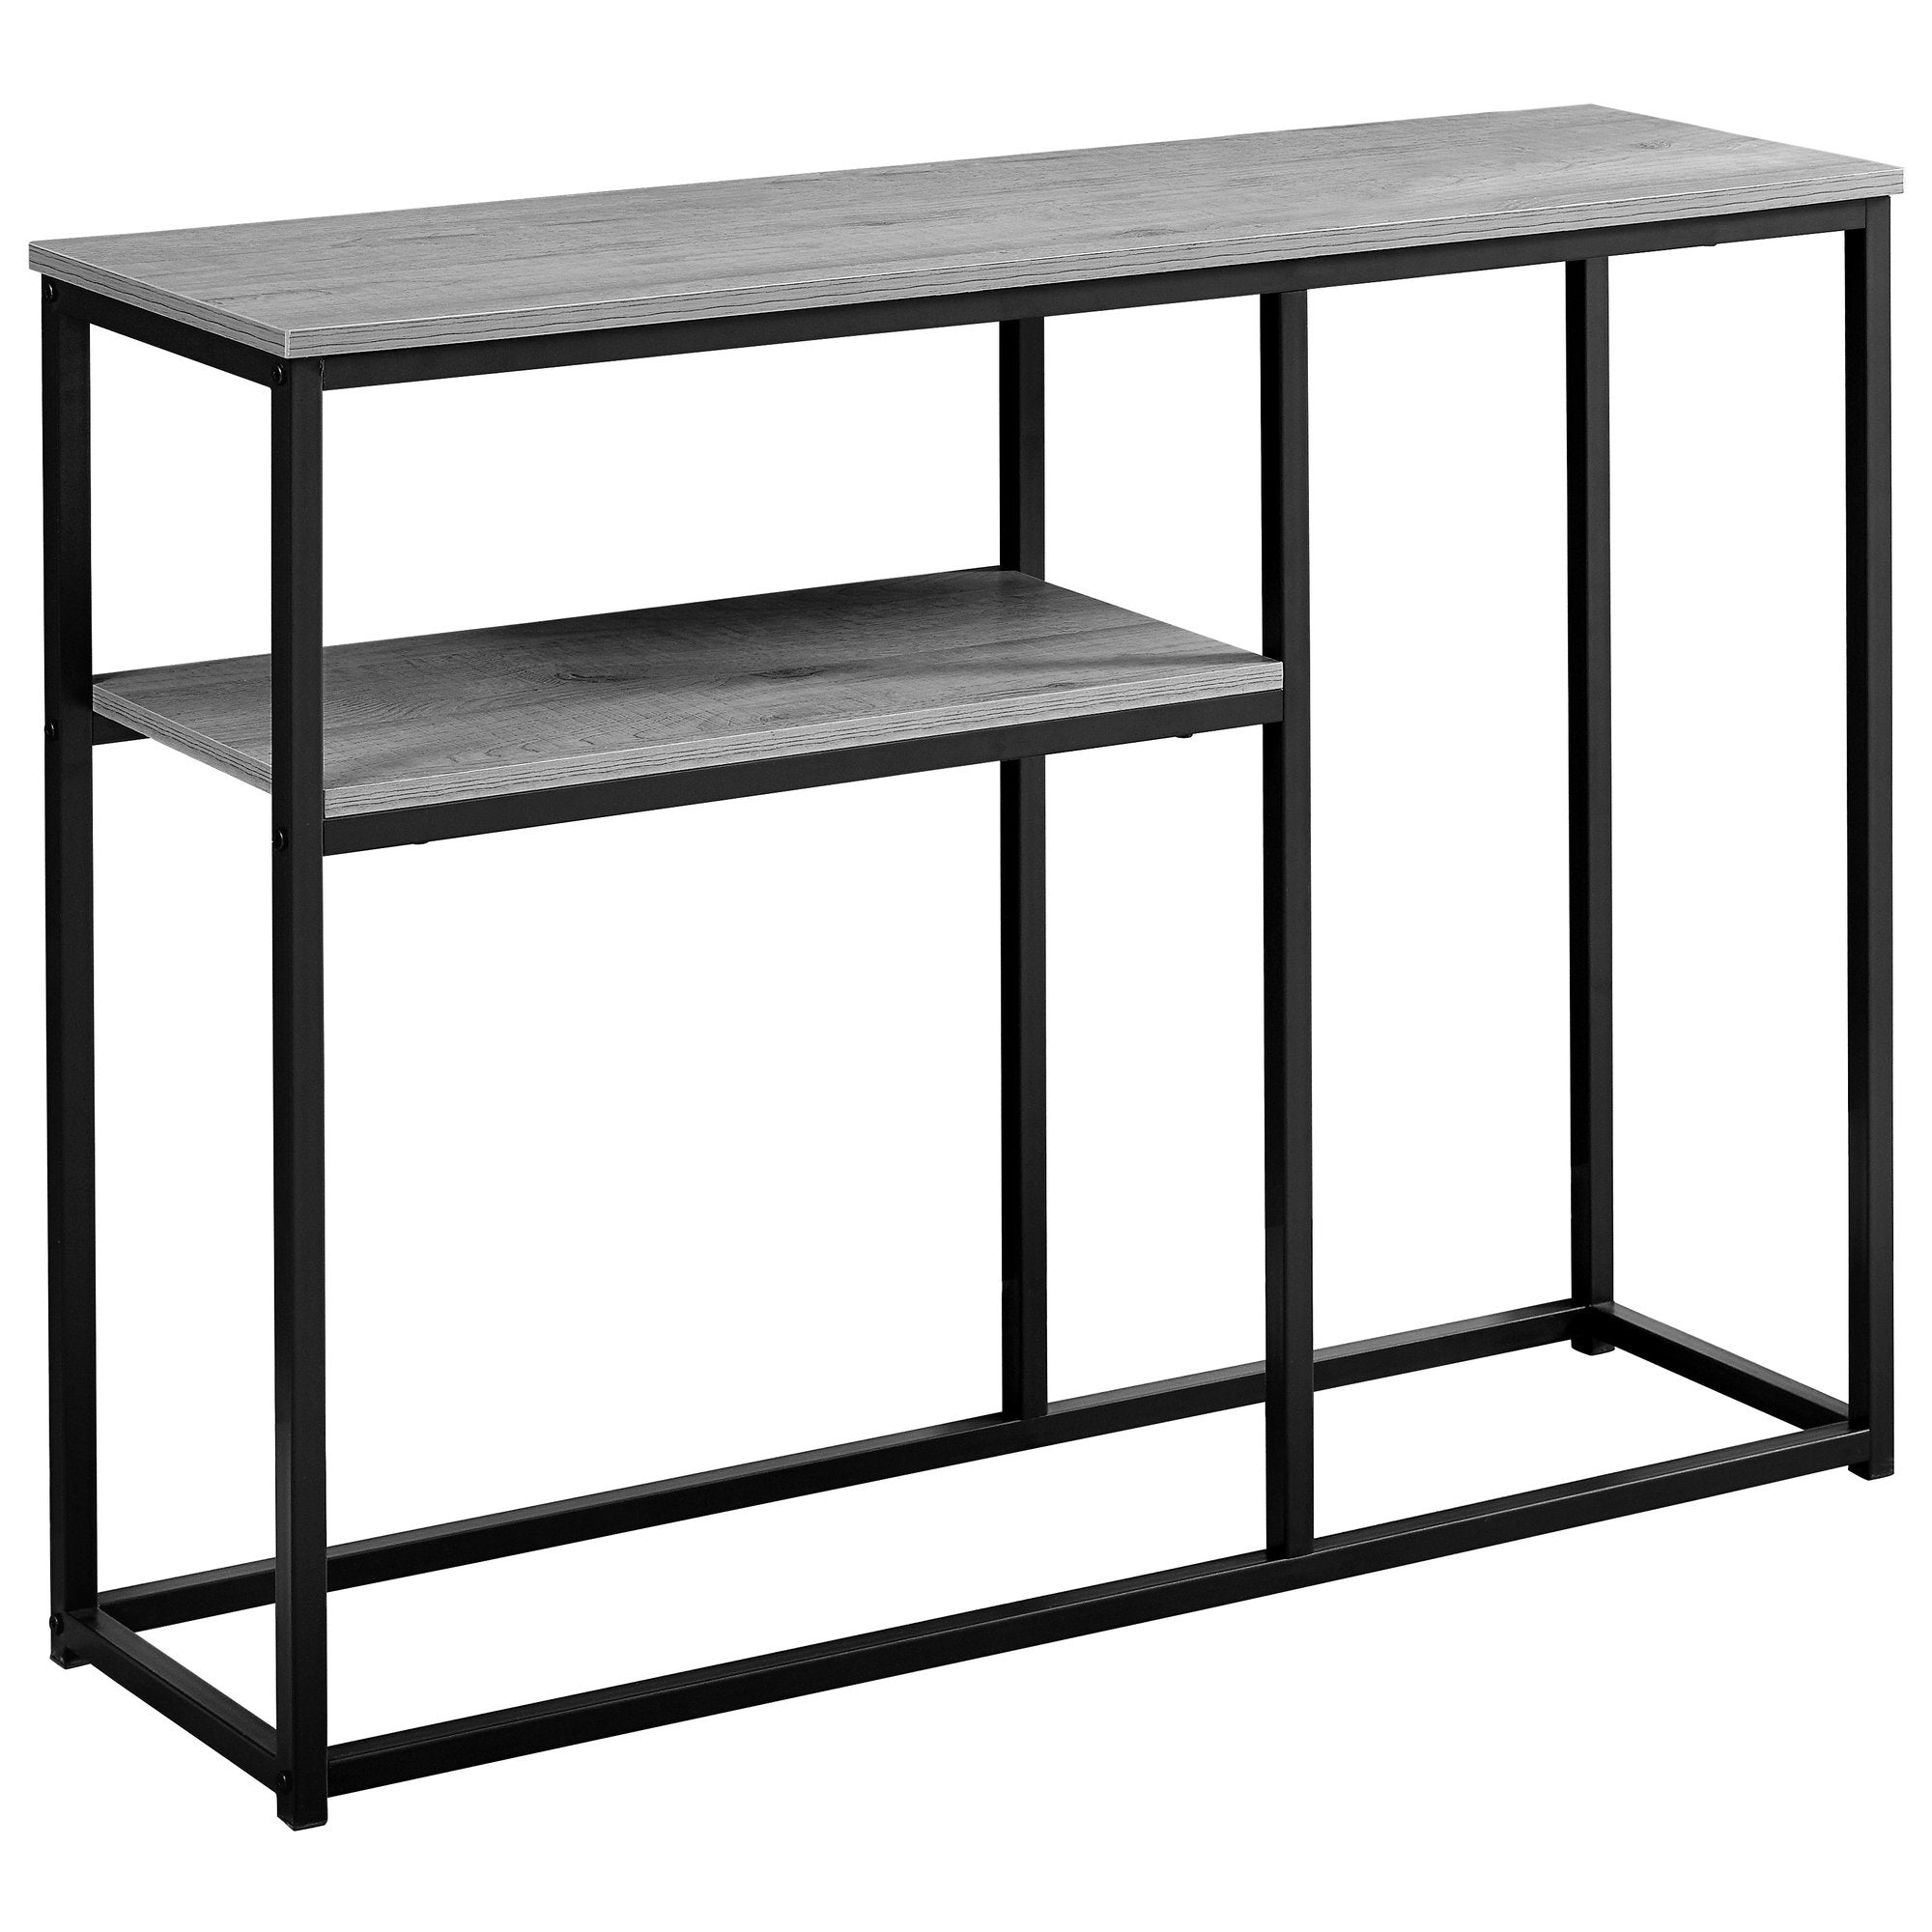 Accent Table - 42"L / Grey / Black Metal Hall Console